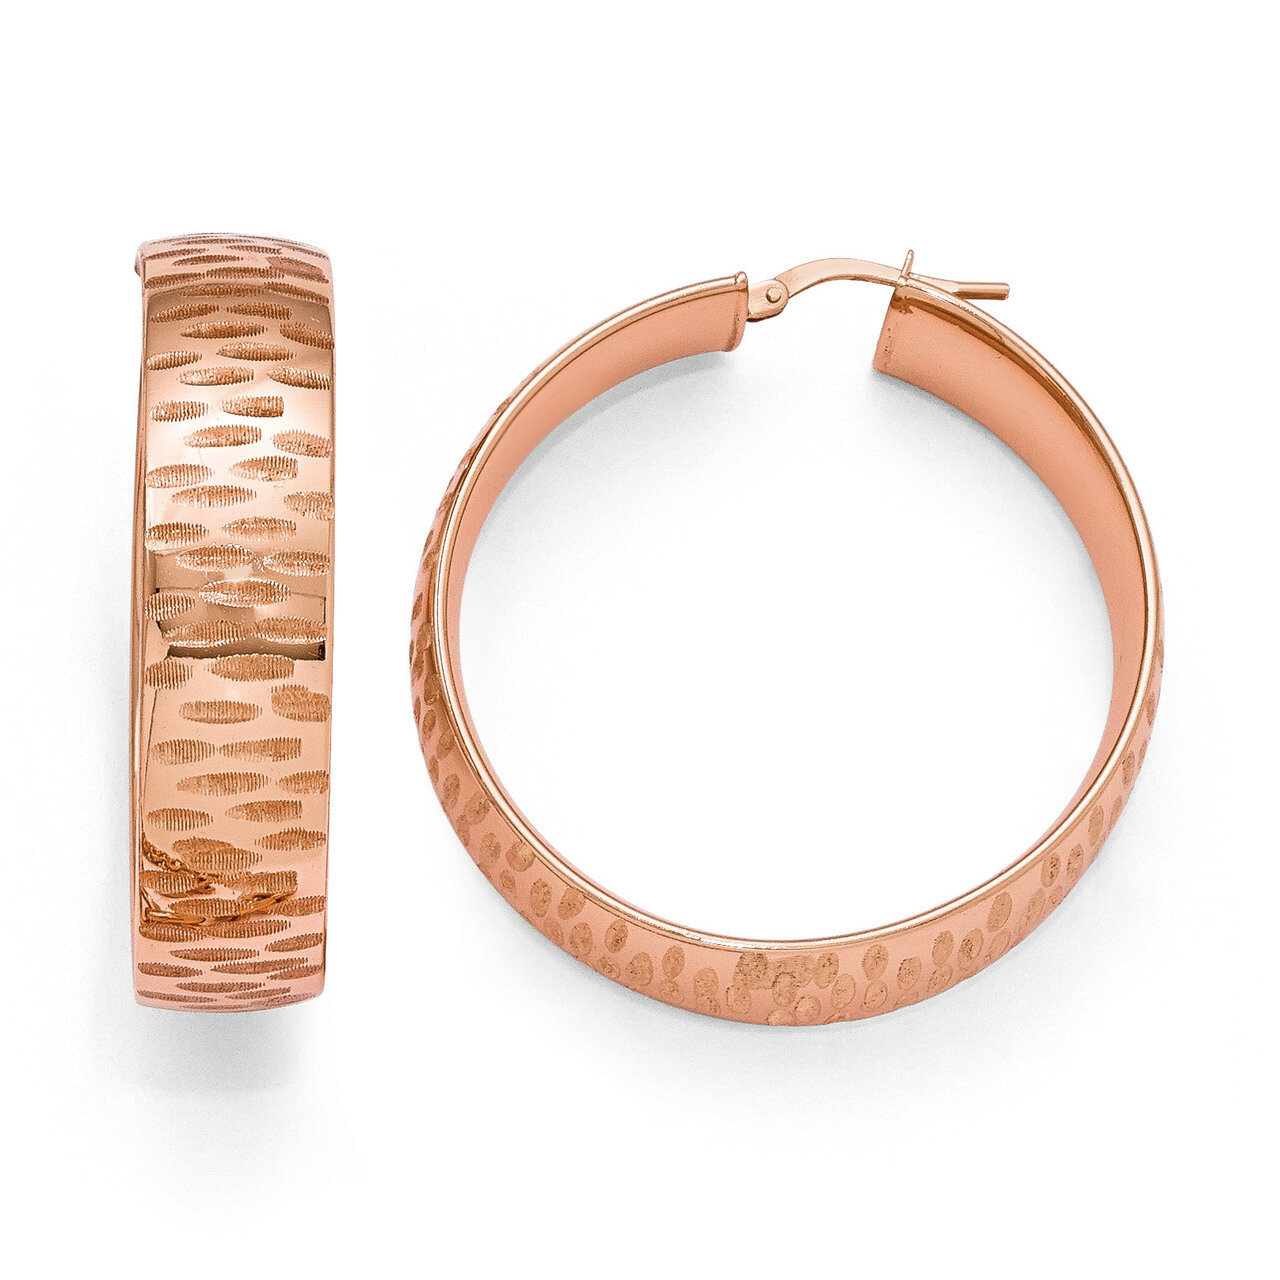 Diego Massimo Etched Rose-tone Hoop Earrings Bronze DME106